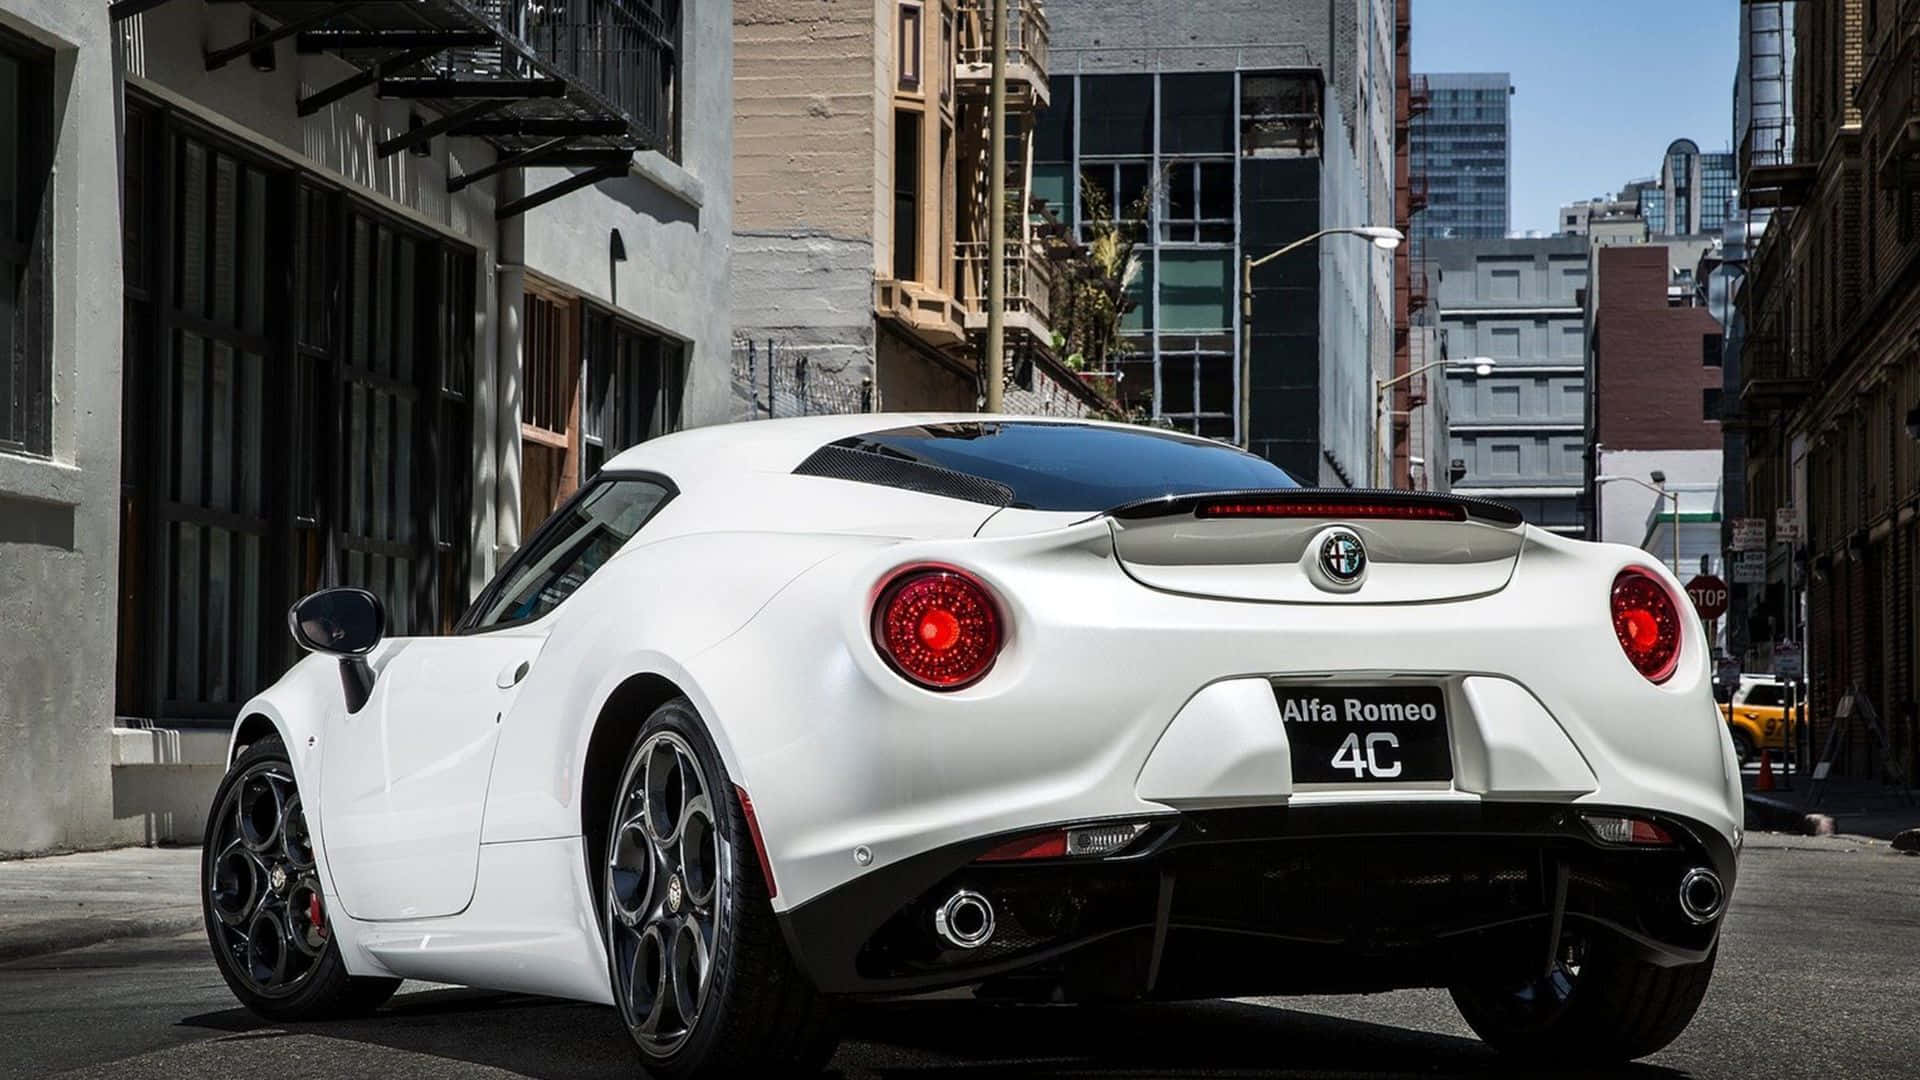 Alfa Romeo 4c - A Perfect Blend Of Performance And Style Background